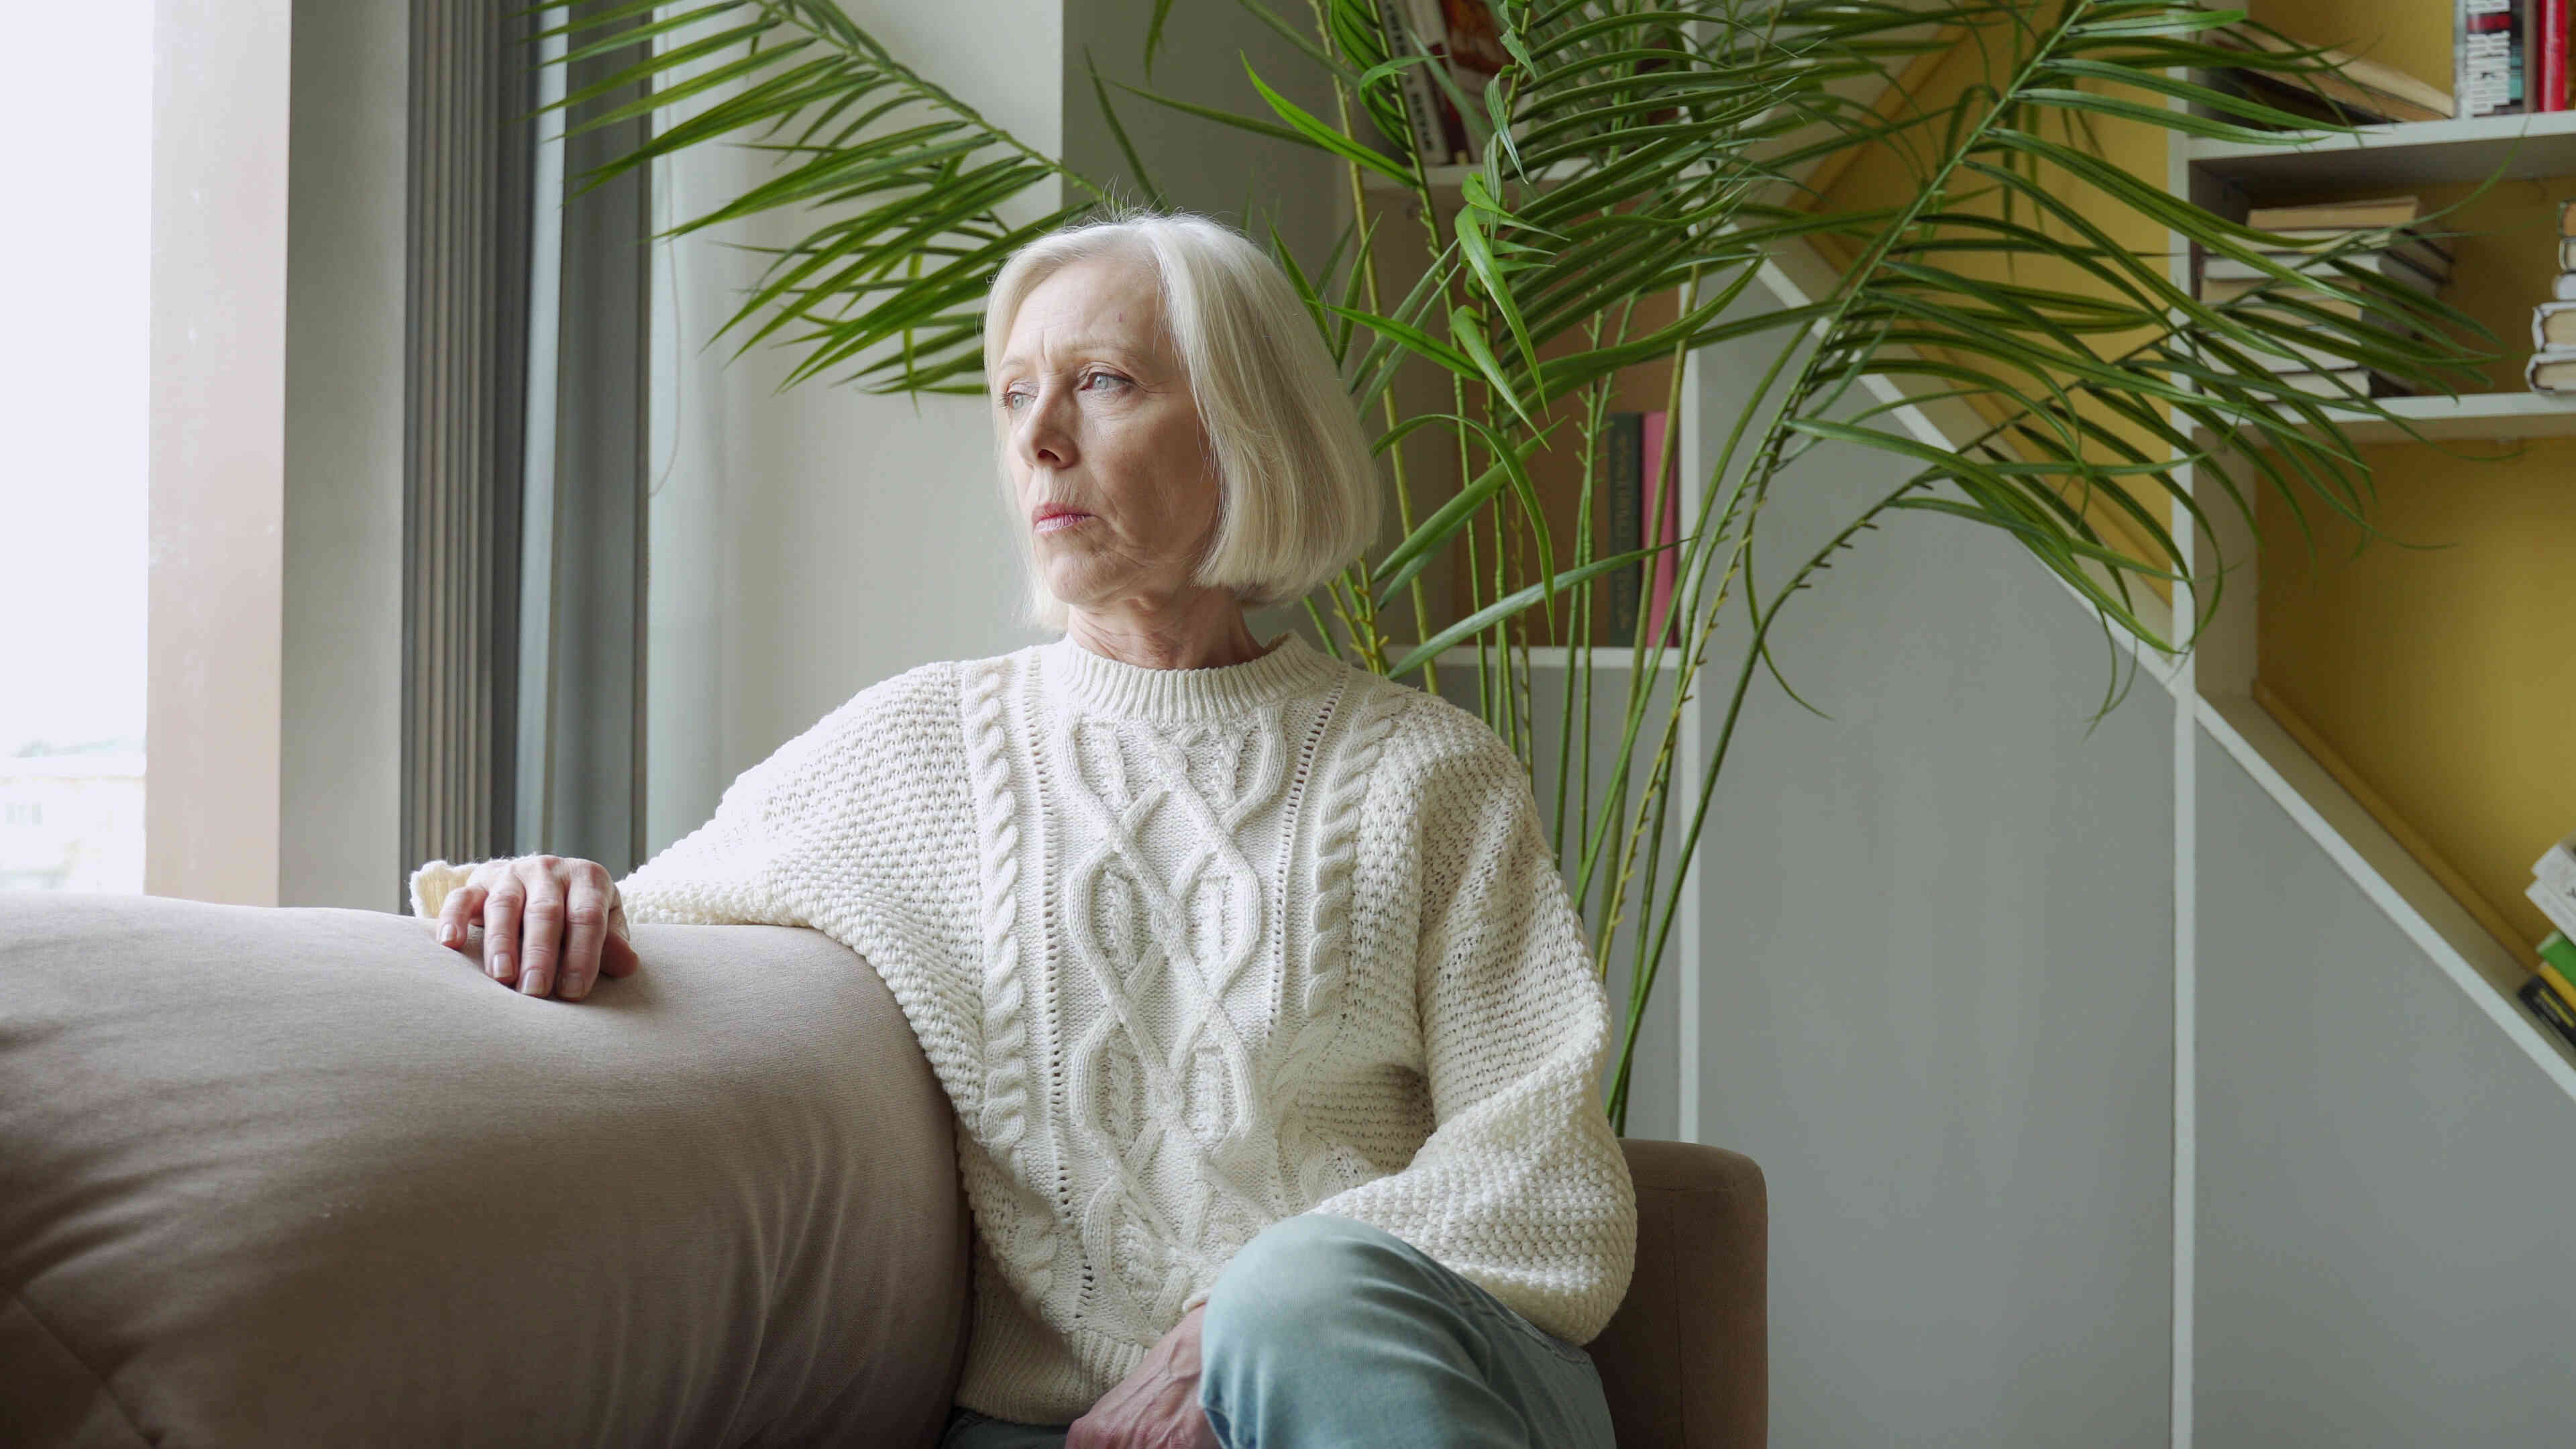 An older woman in a white knit sweater sits on her couch and gazes off with a worried expression.